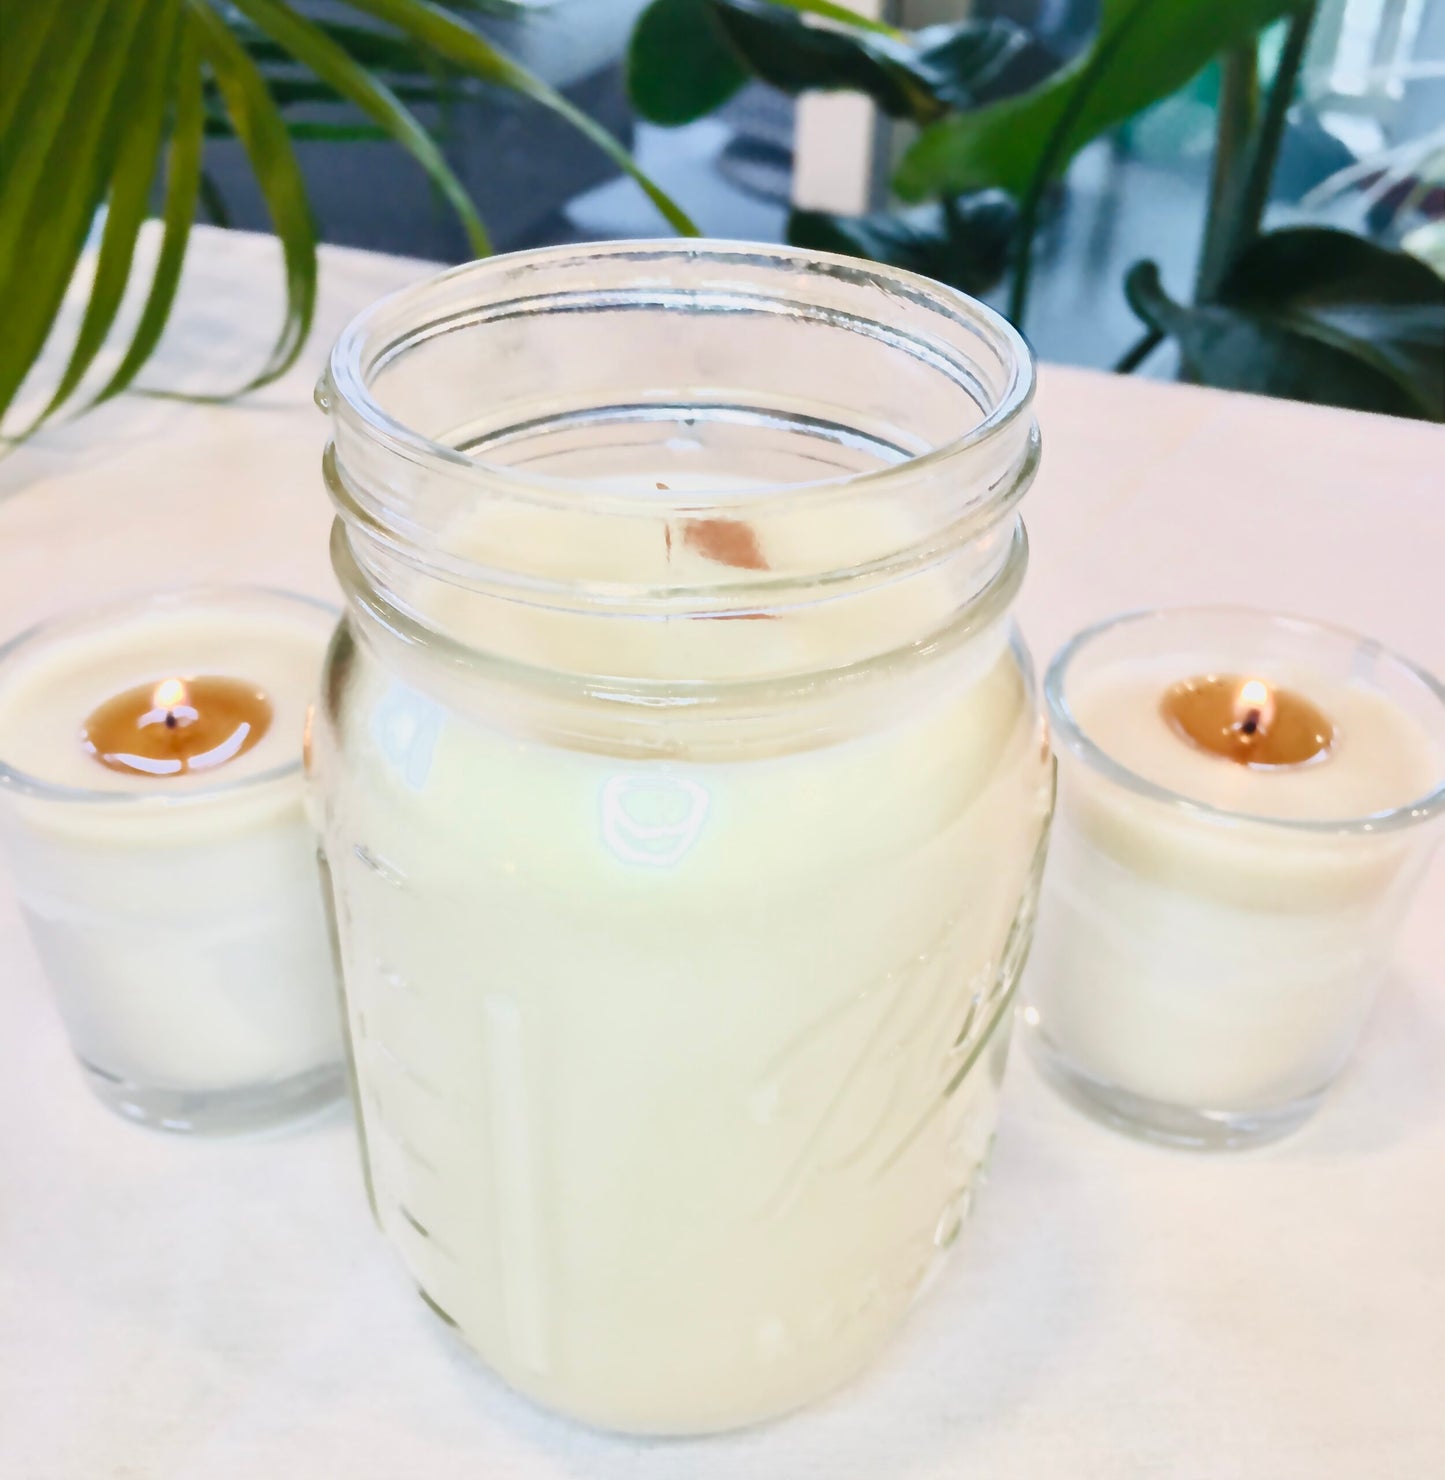 Scent Free Candle- 100% Beeswax, Cedar Wood Wicks